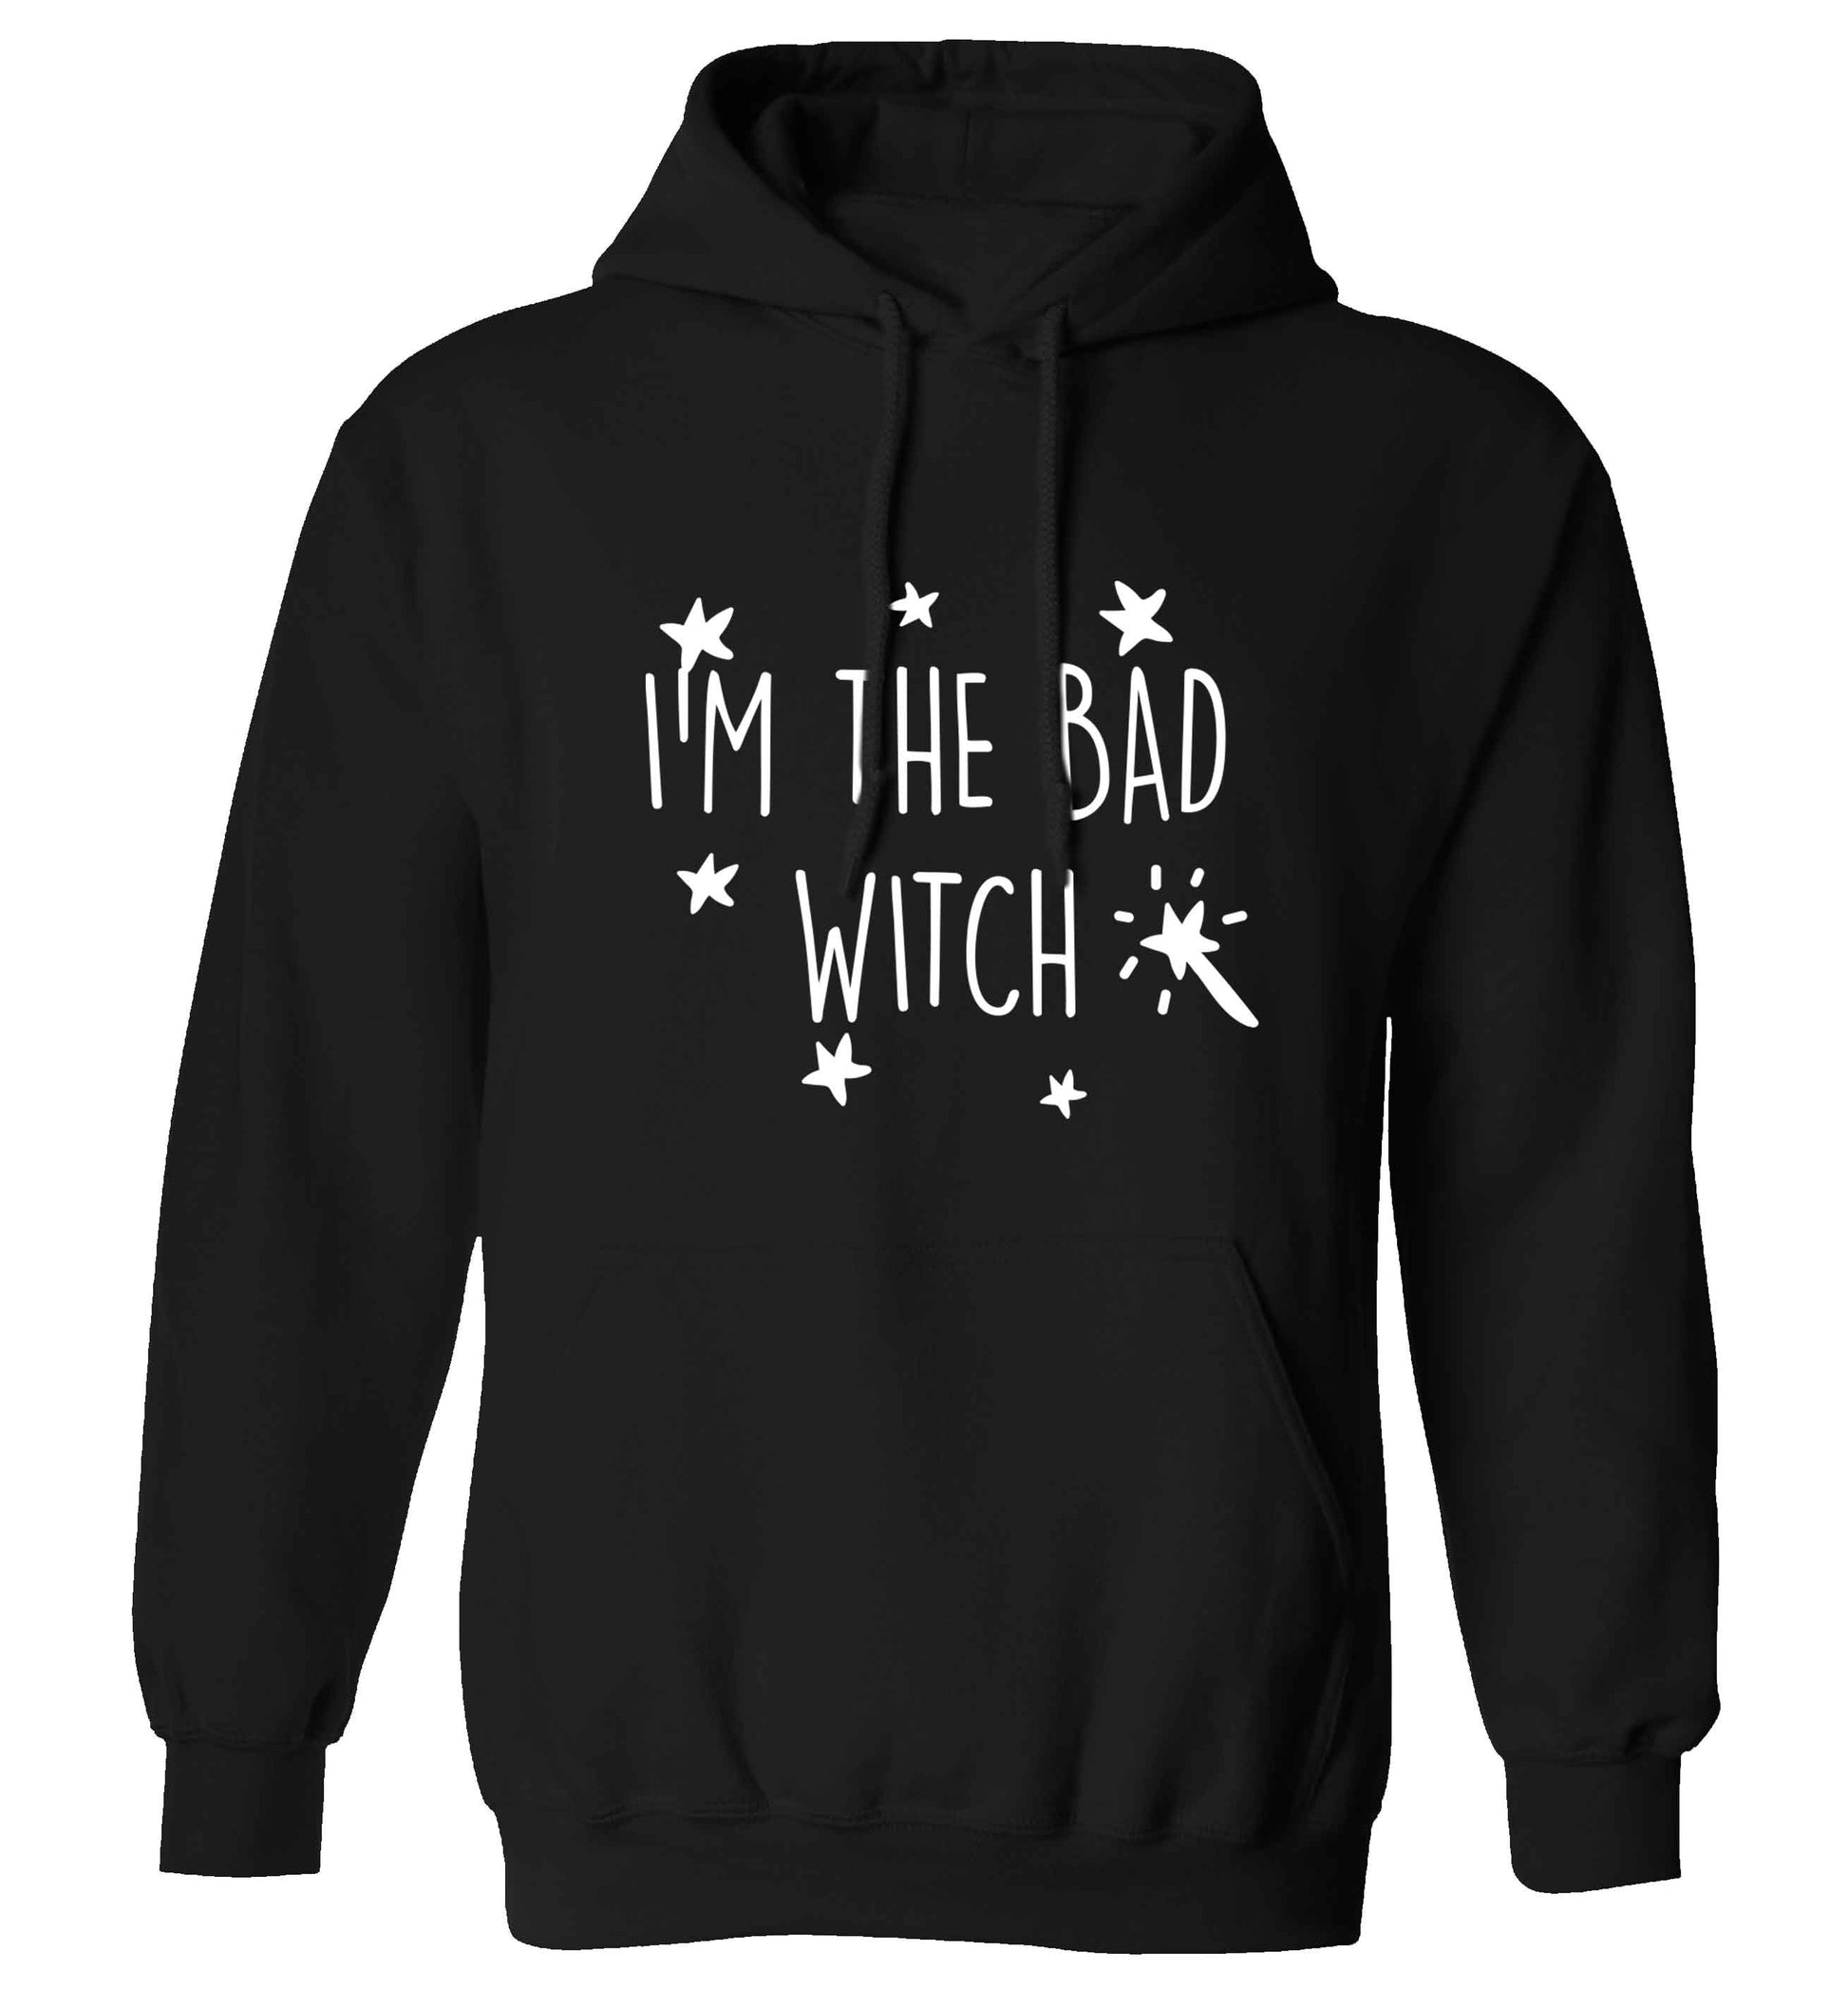 Bad witch adults unisex black hoodie 2XL